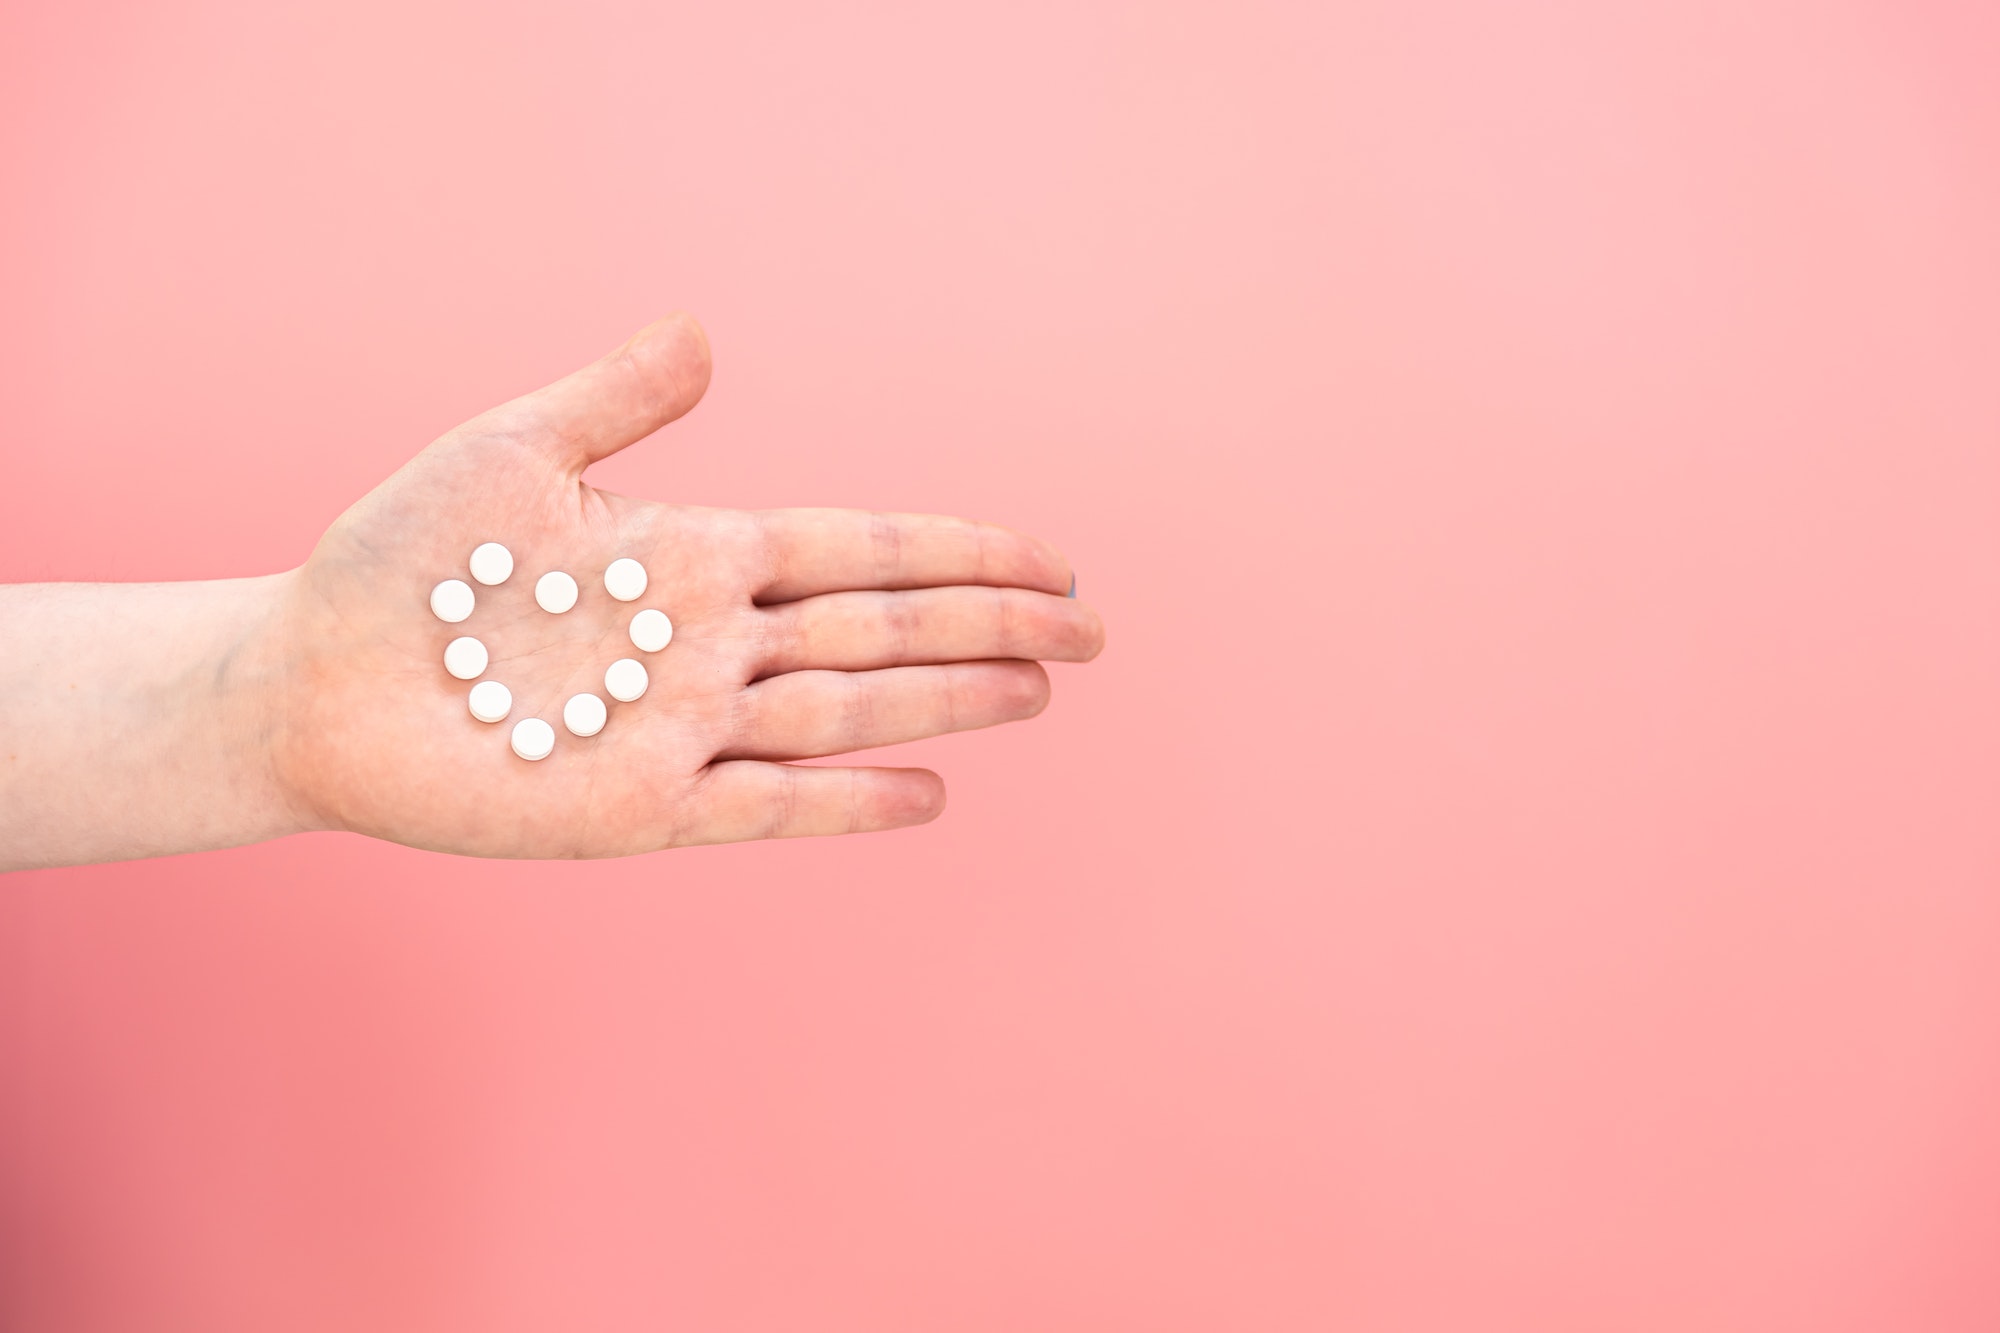 Pills in the shape of a heart on a female palm, pink background.